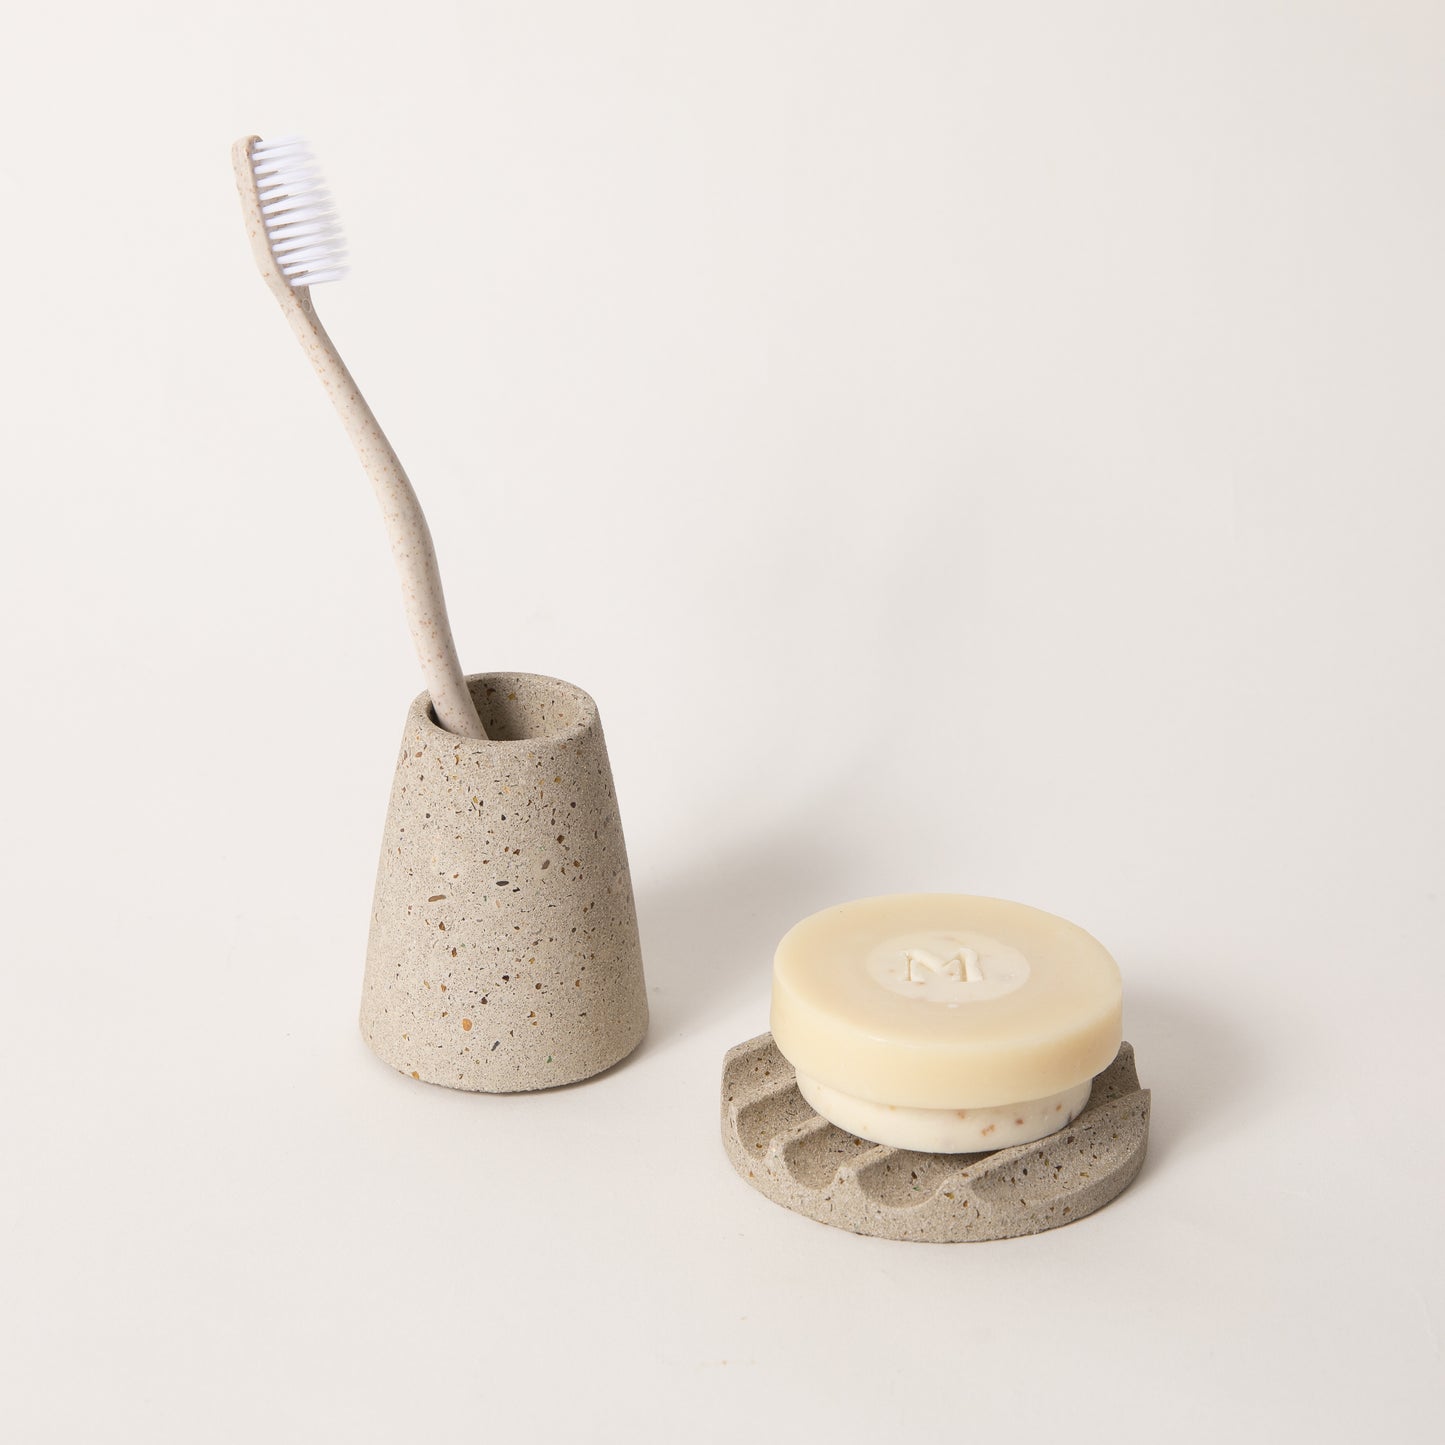 The mini soap dish & toothbrush holder set in natural terrazzo.